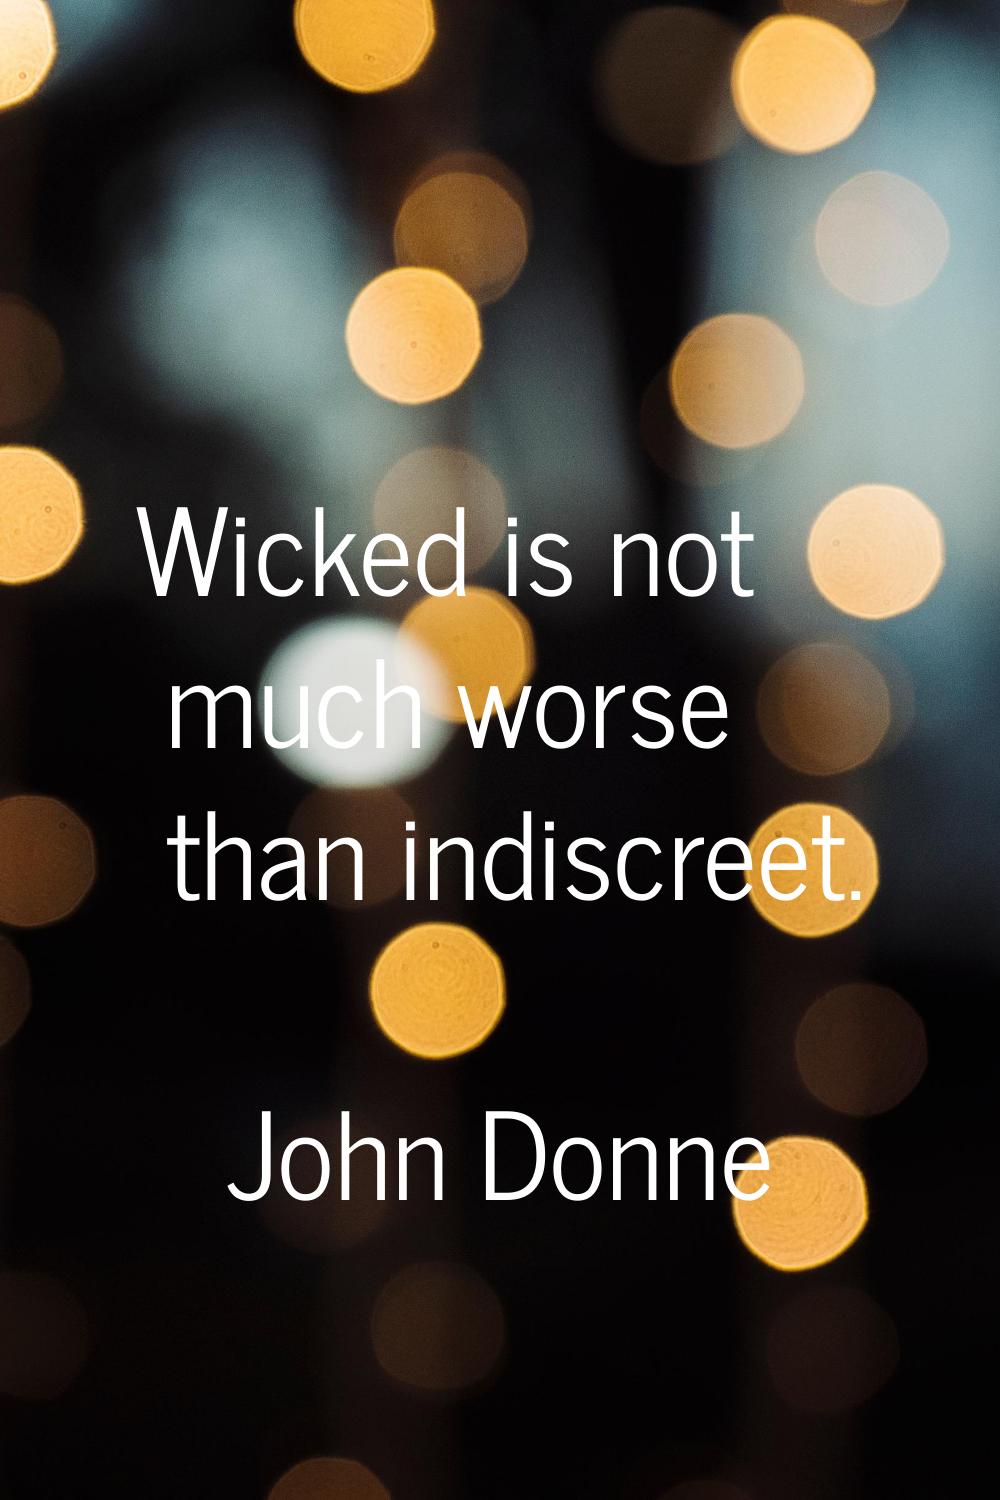 Wicked is not much worse than indiscreet.